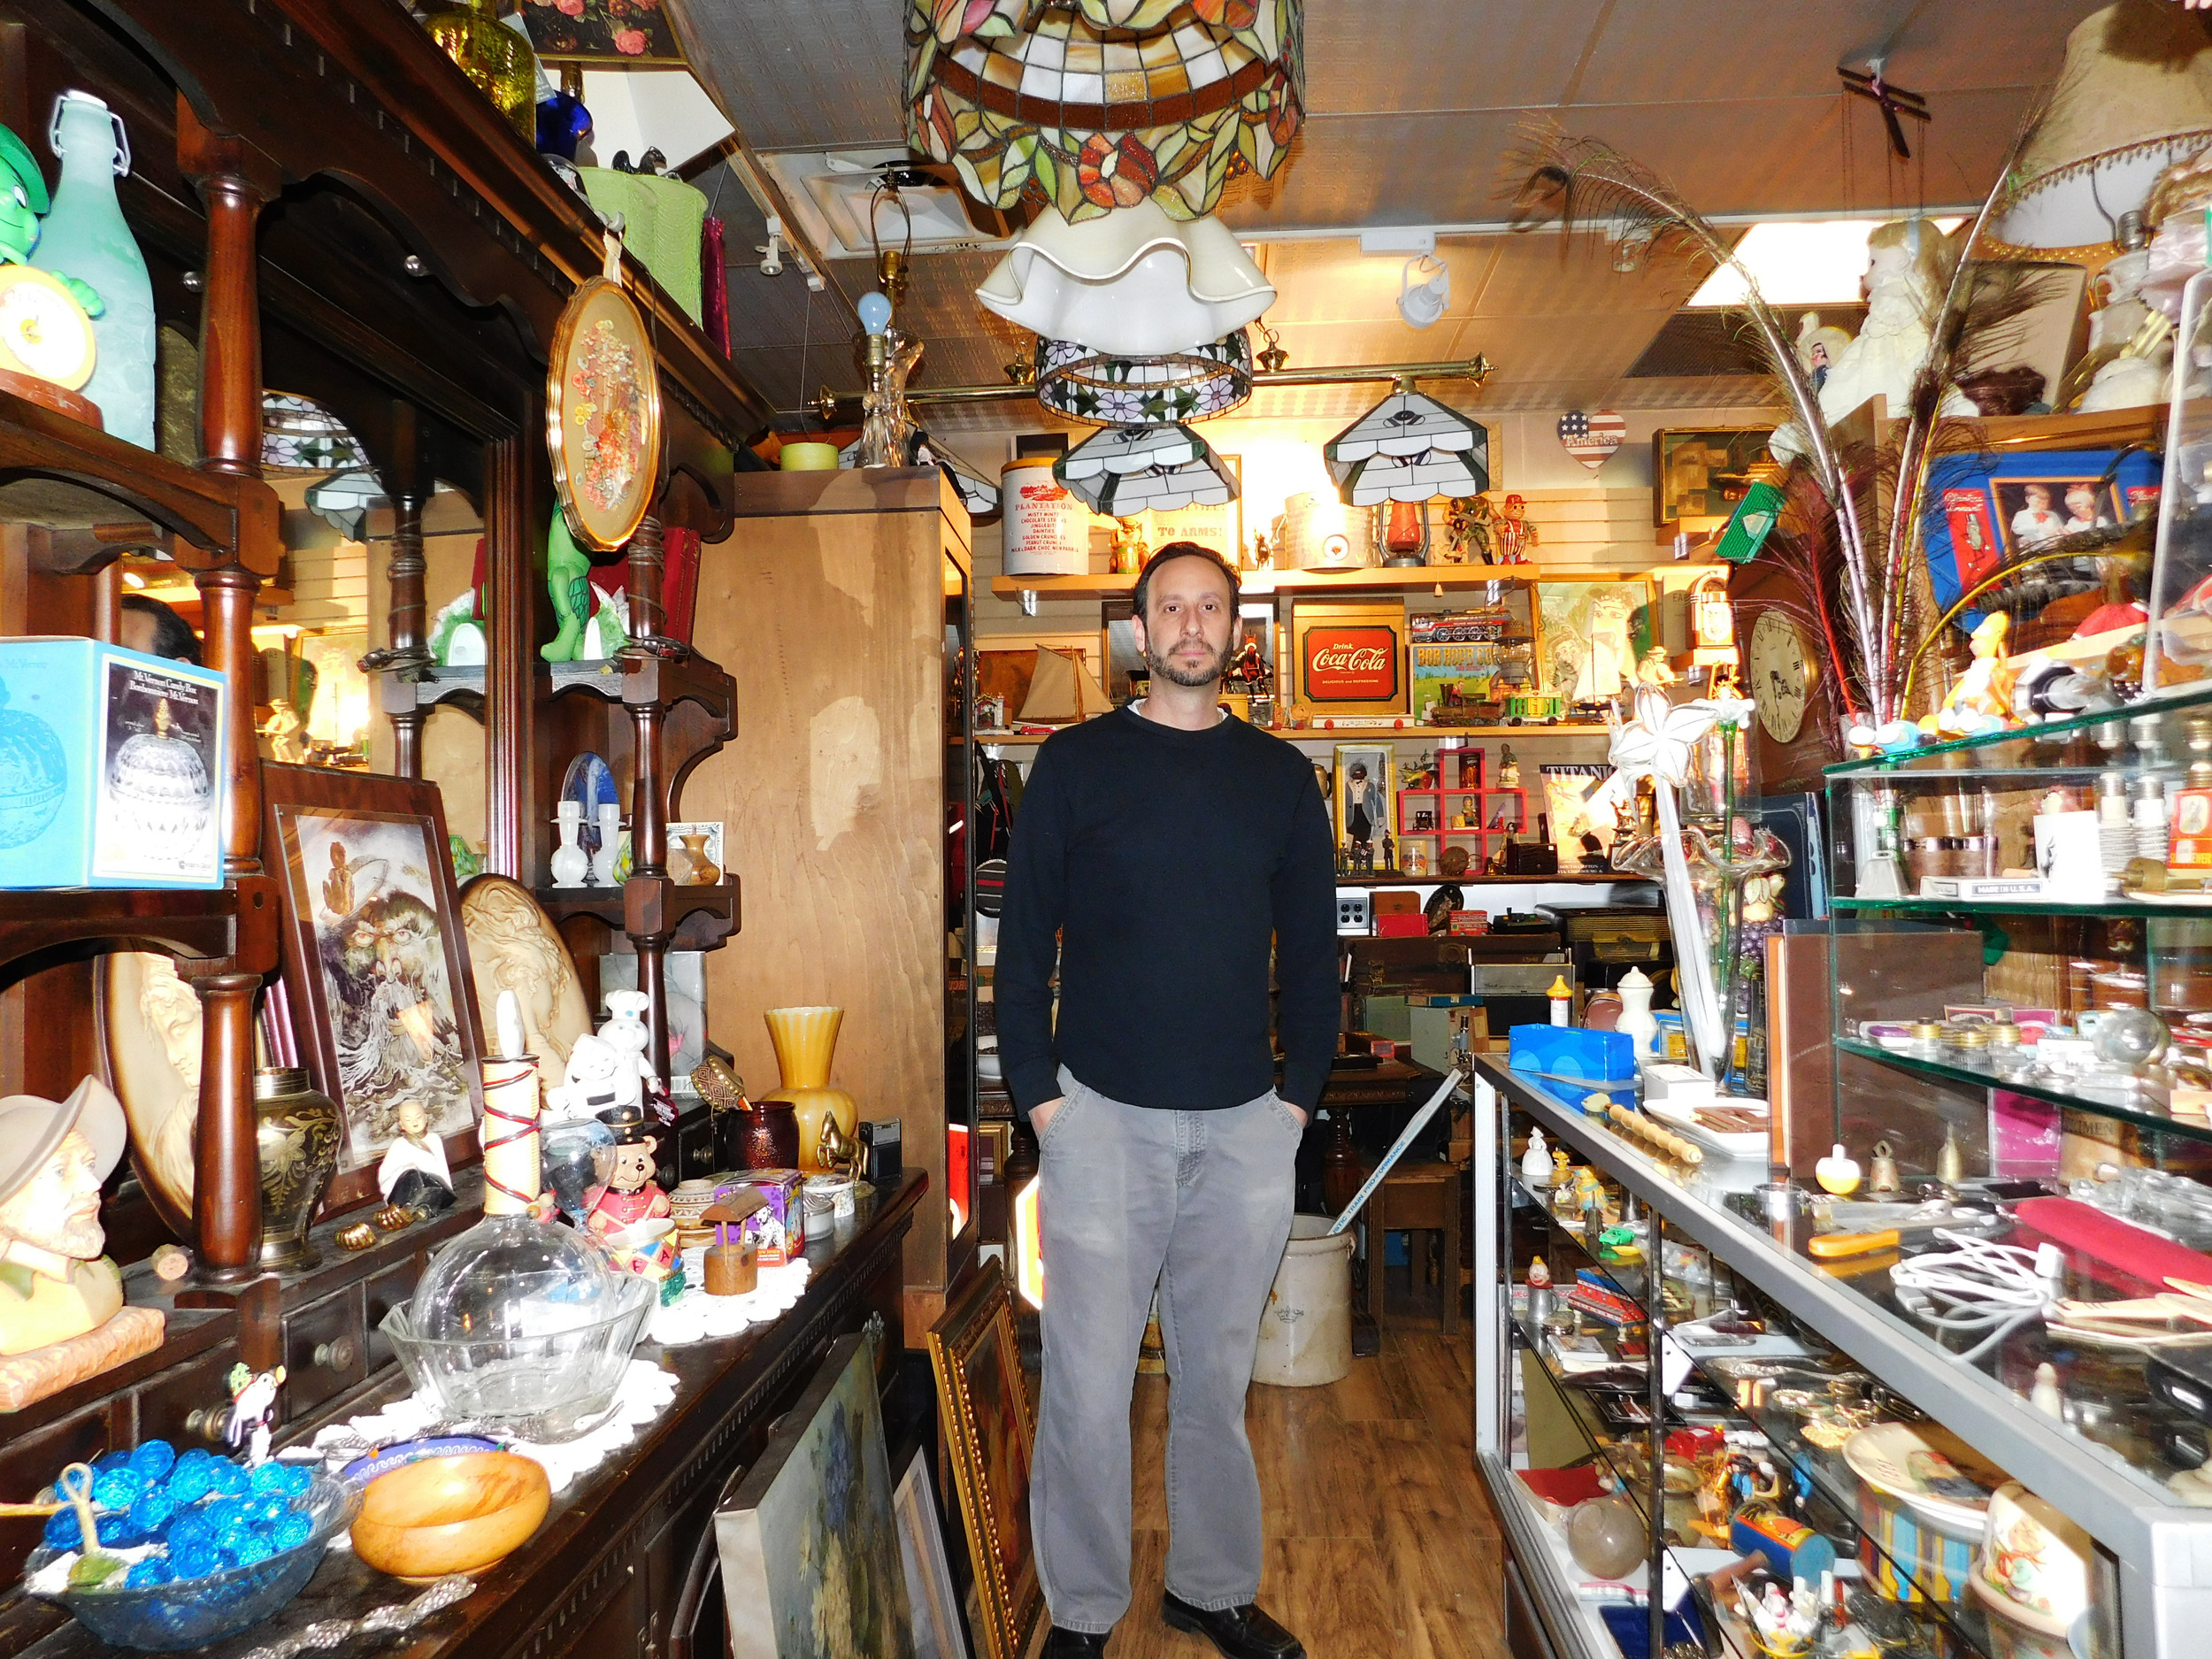 Tuzzolo took the Herald on a brief tour of his thrift shop, which doubles as a space to unload items when seniors downsize their living situations.